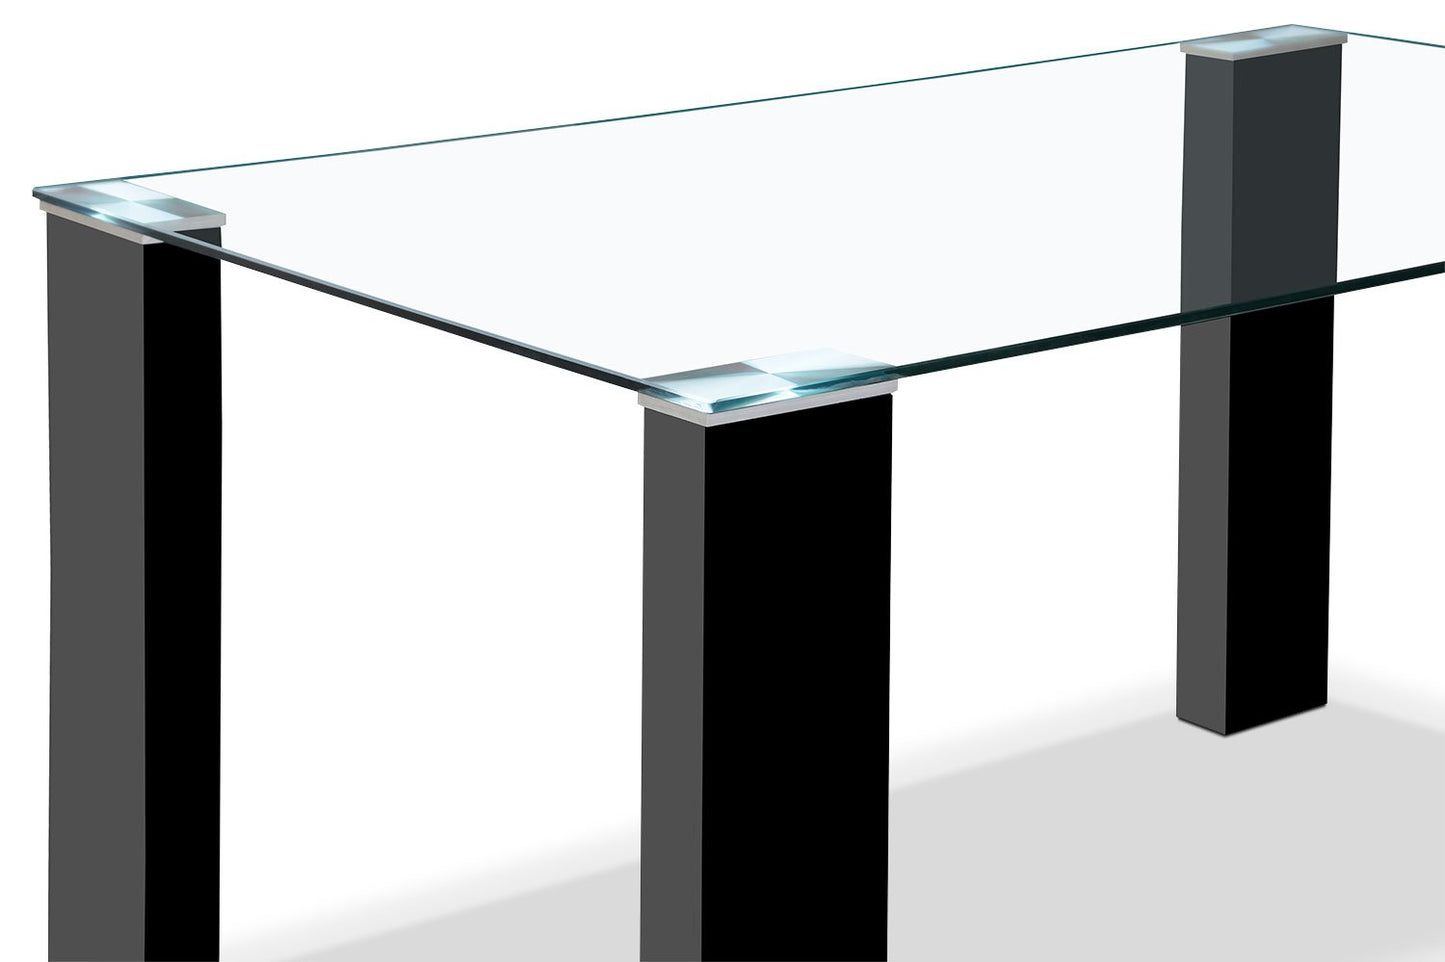 Convoy Dining Table - Black